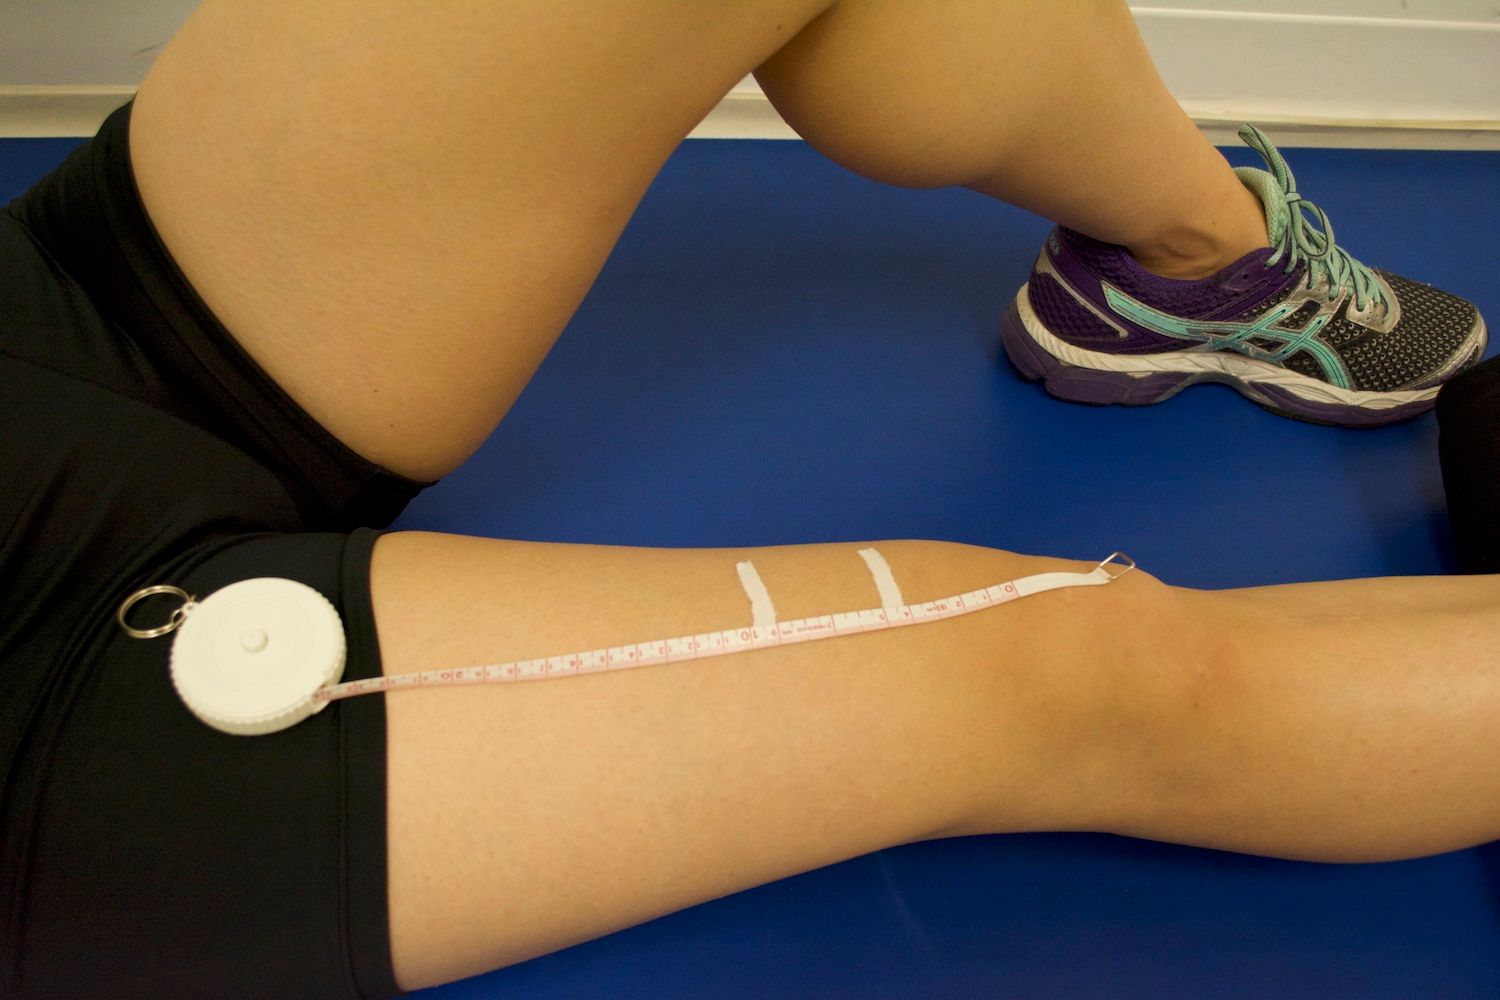 Here is a close up image showing adhesive tape marking the 5cm and 10cm above the knee cap, where circumference will be measured.